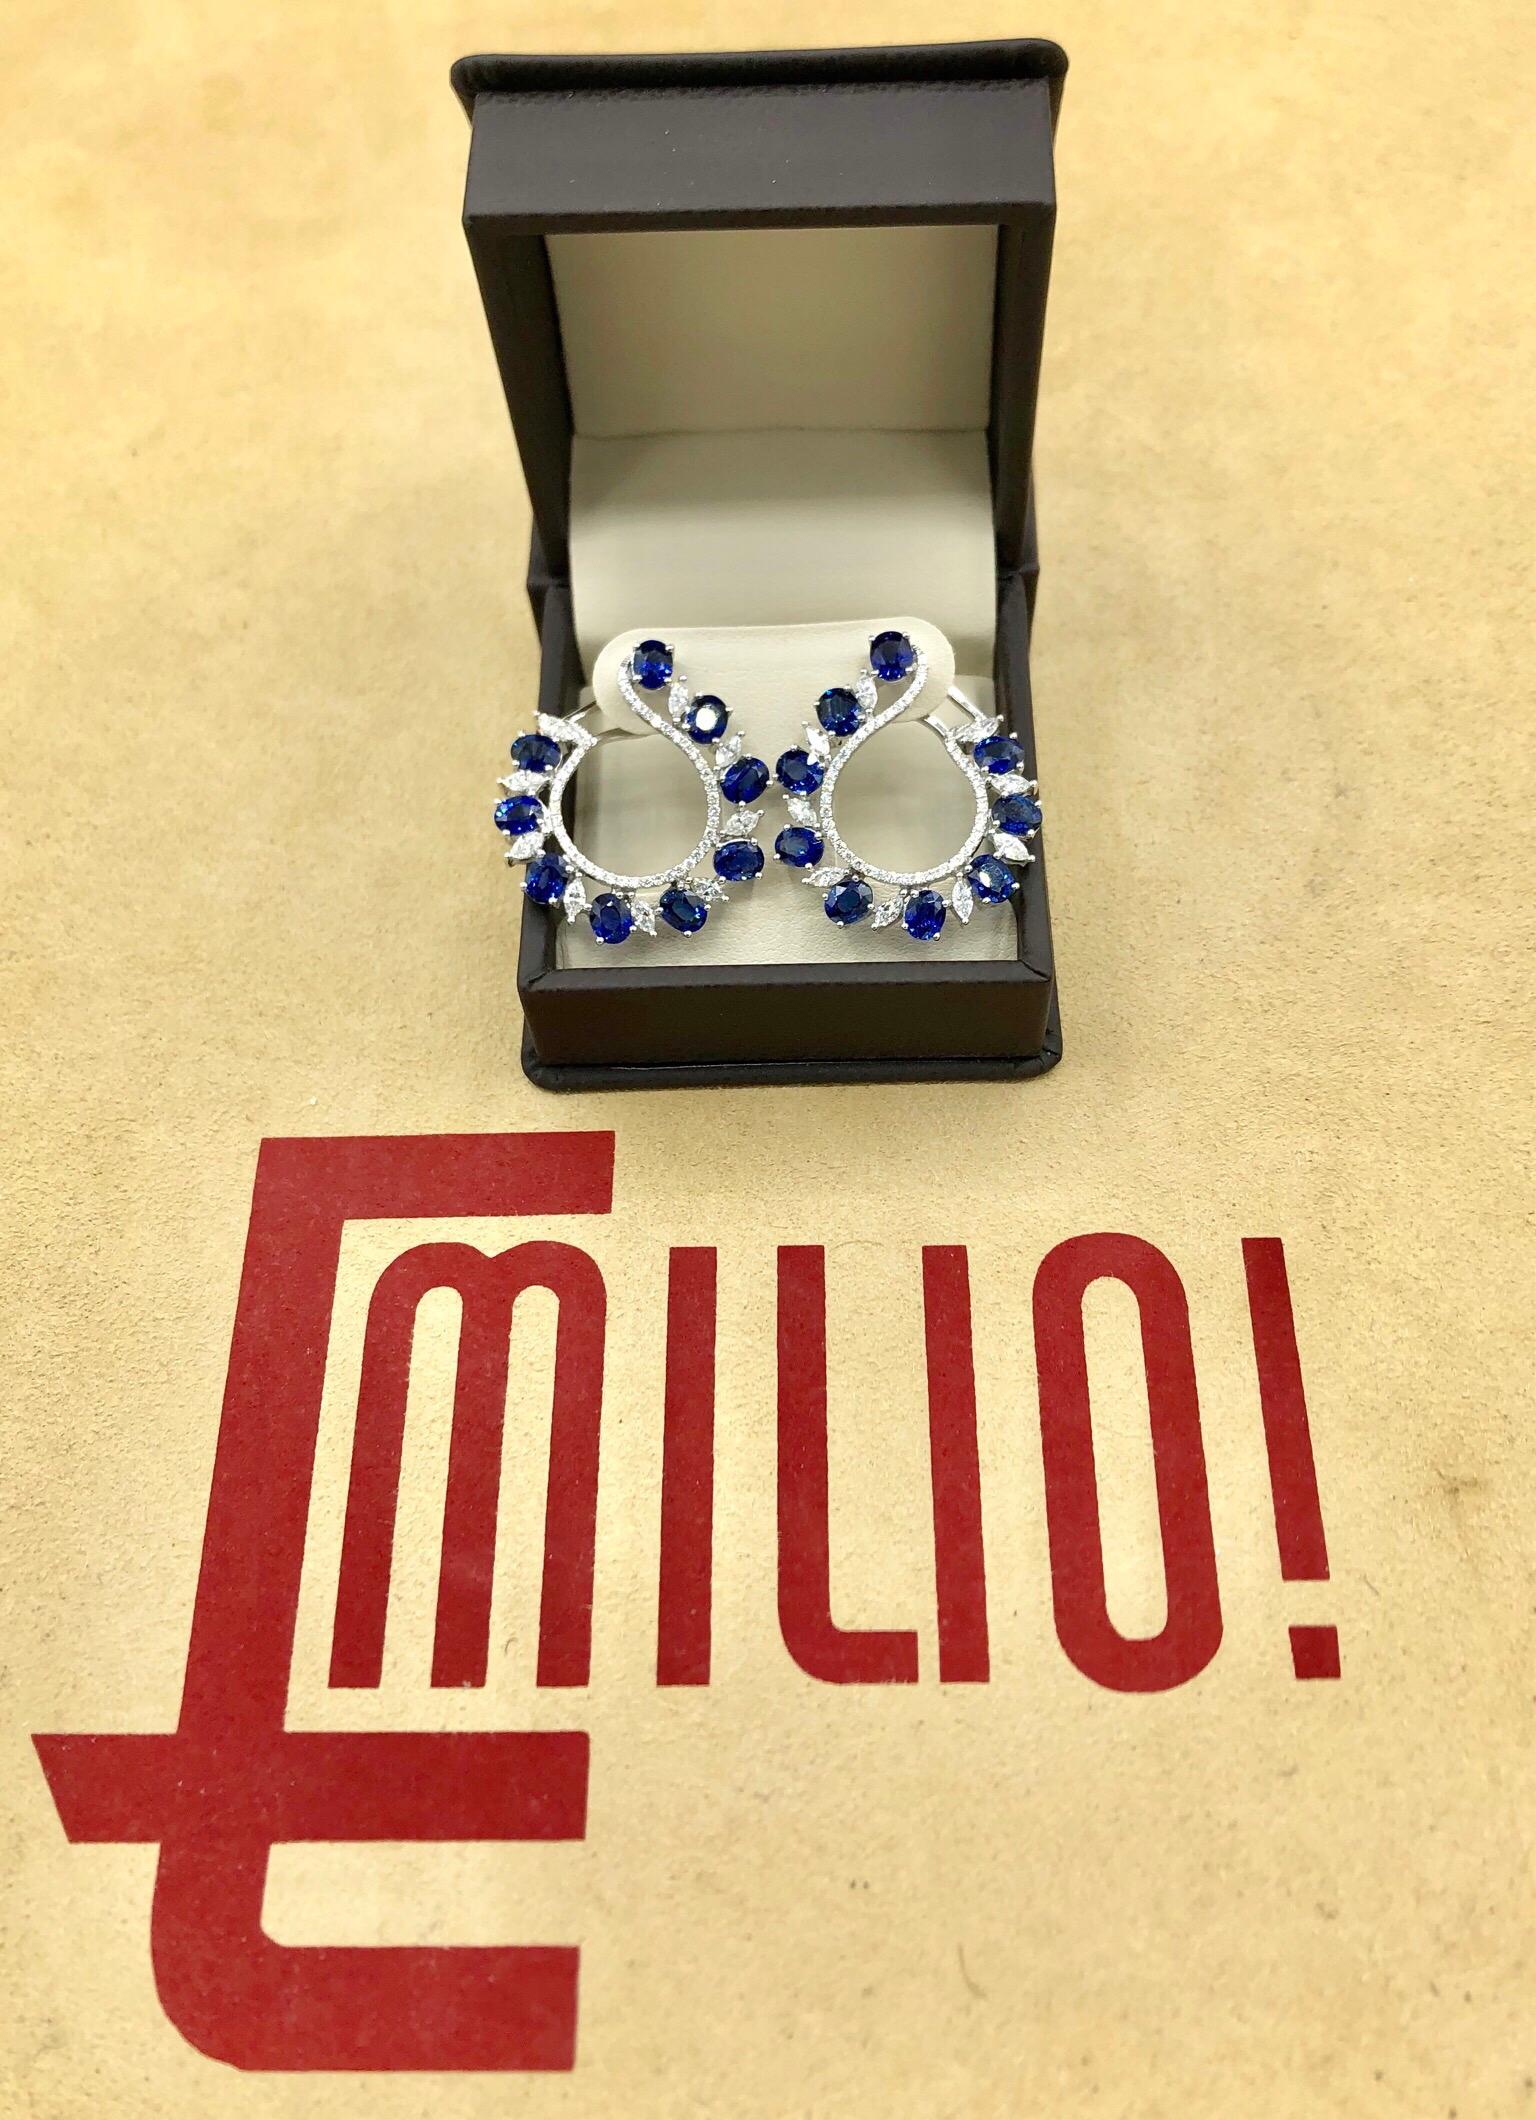 This lovely piece has been designed and manufactured in the Emilio Jewelry Atelier. Our brand is known for our perfection in jewelry making, and cherry picking the very best diamonds for our jewels. 
Approx total weight: 9.41
approx 7.80ct sapphires